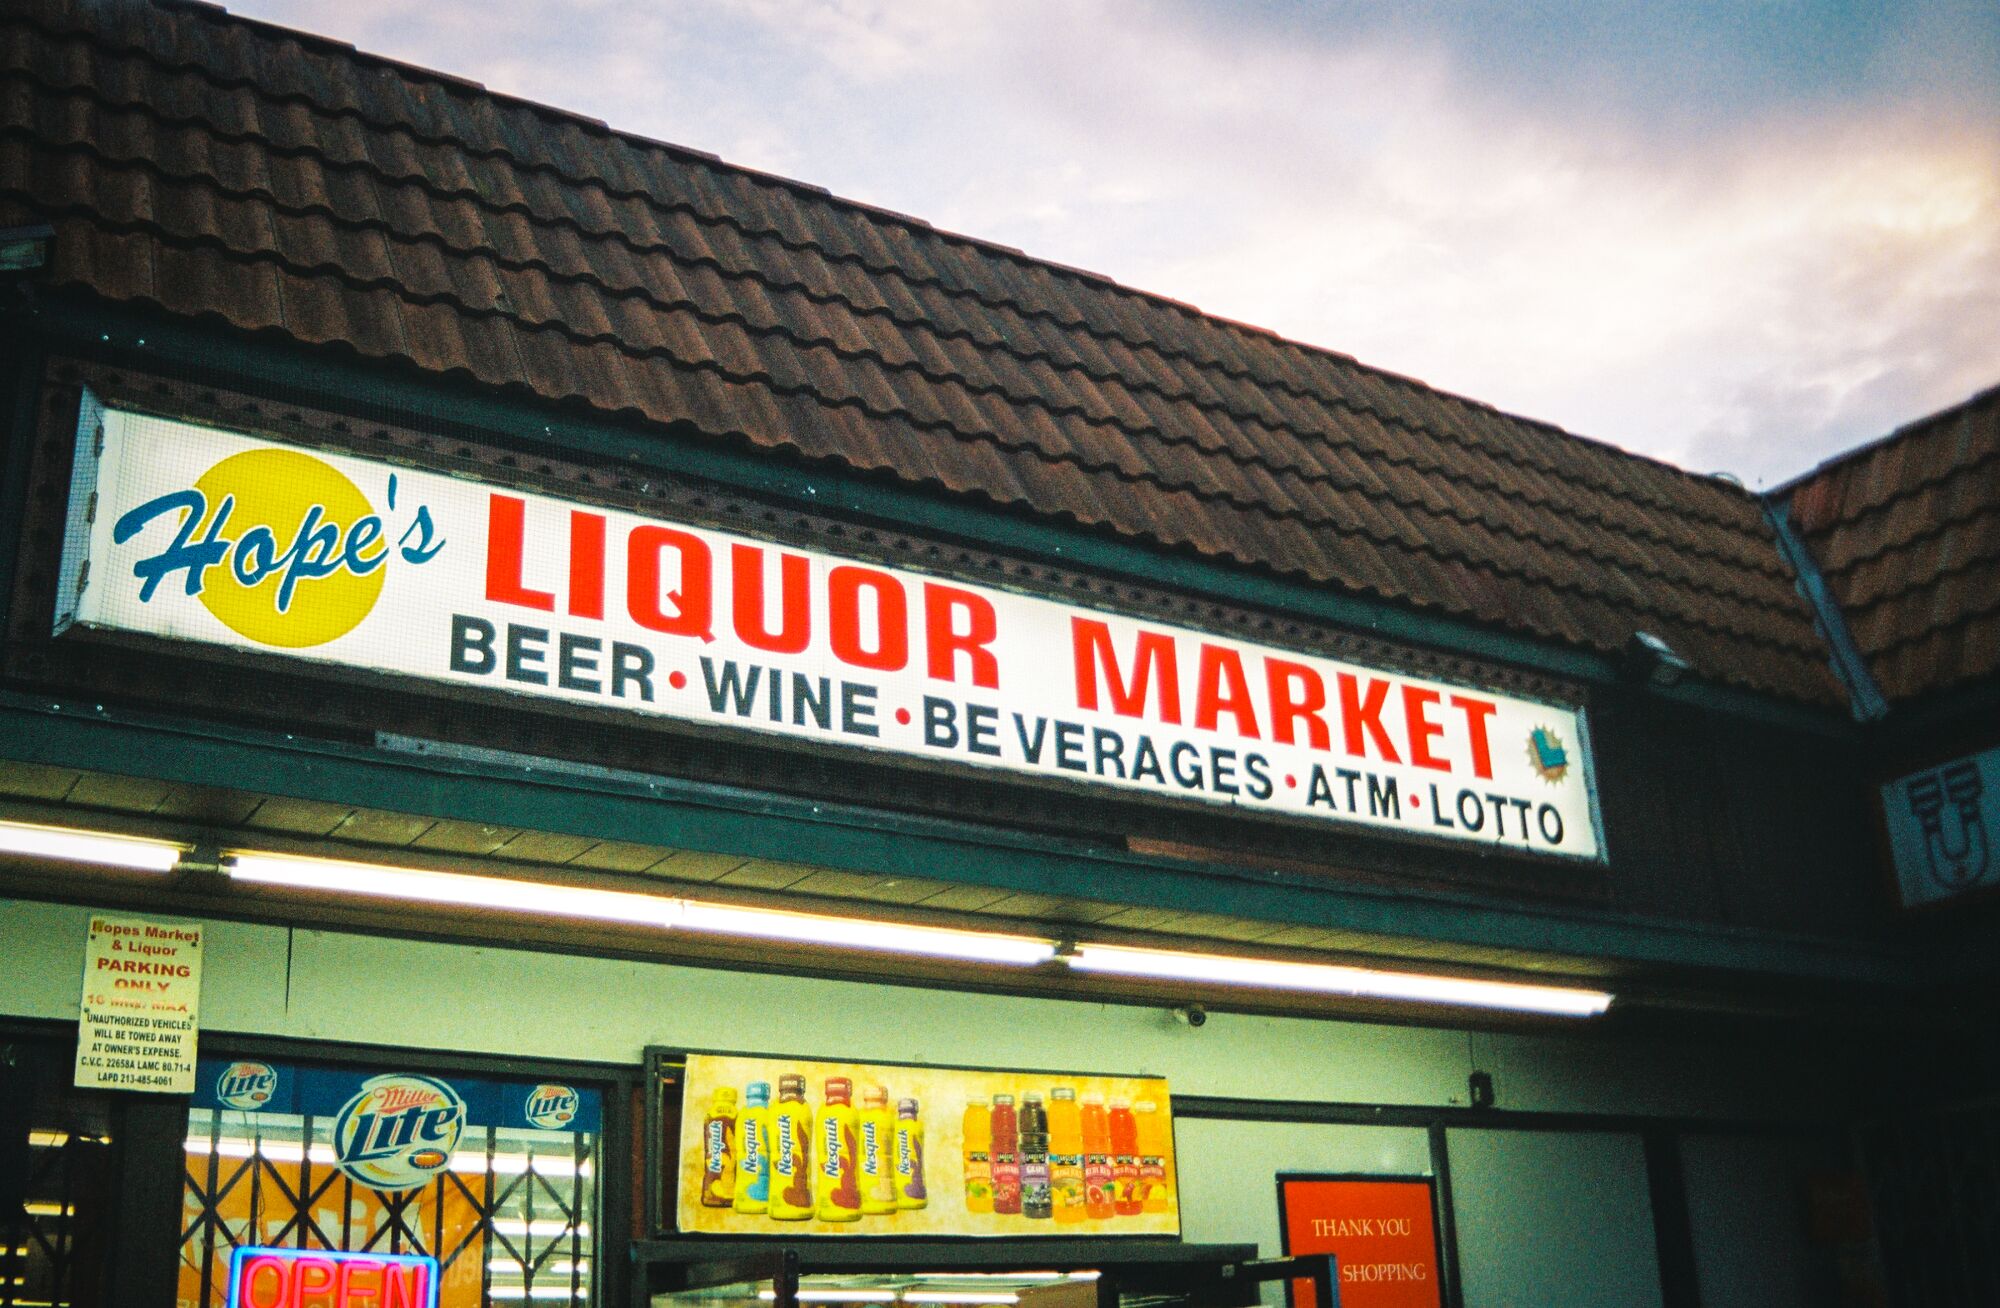 In Historic Filipinotown, Hope's Liquor is an unofficial community center.